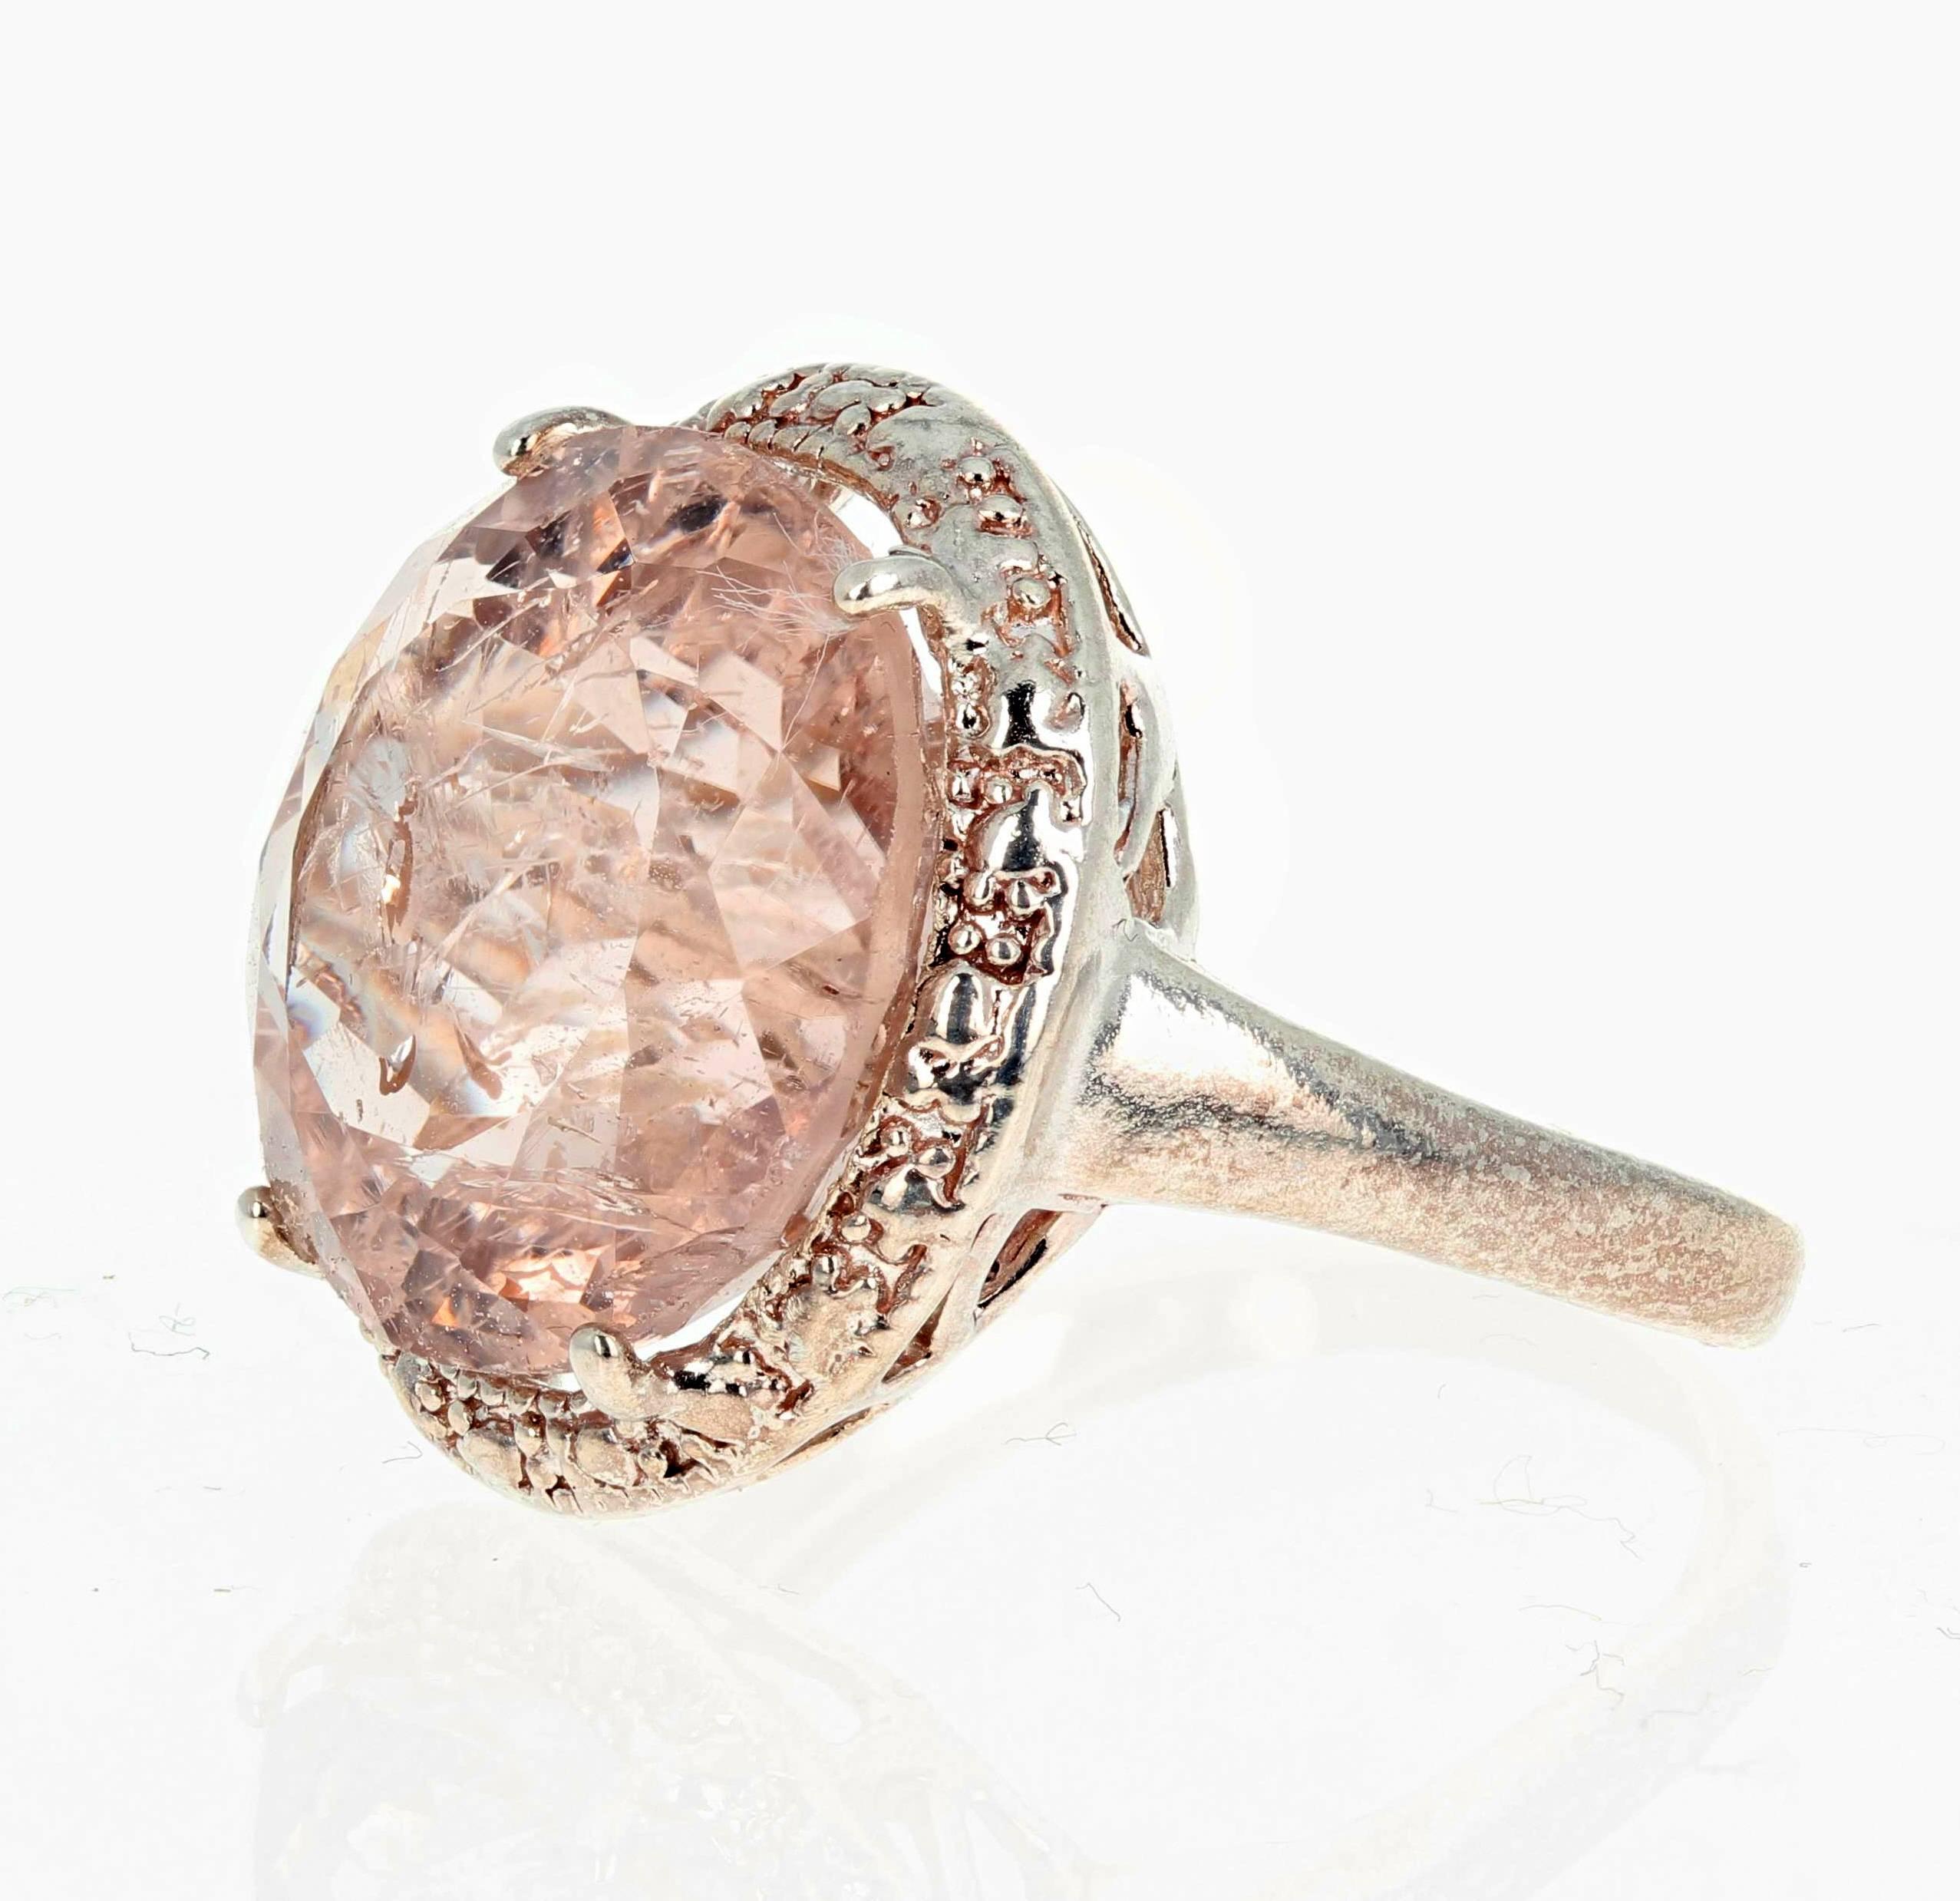 Glittering 10.6 carat natural Morganite (15.2 mm) sterling silver ring size 6 (sizable).  Spectacular optical effects in the Morganite exhibit reflections and brilliant highlights that somehow don't show up in the picture but are truly amazing.   